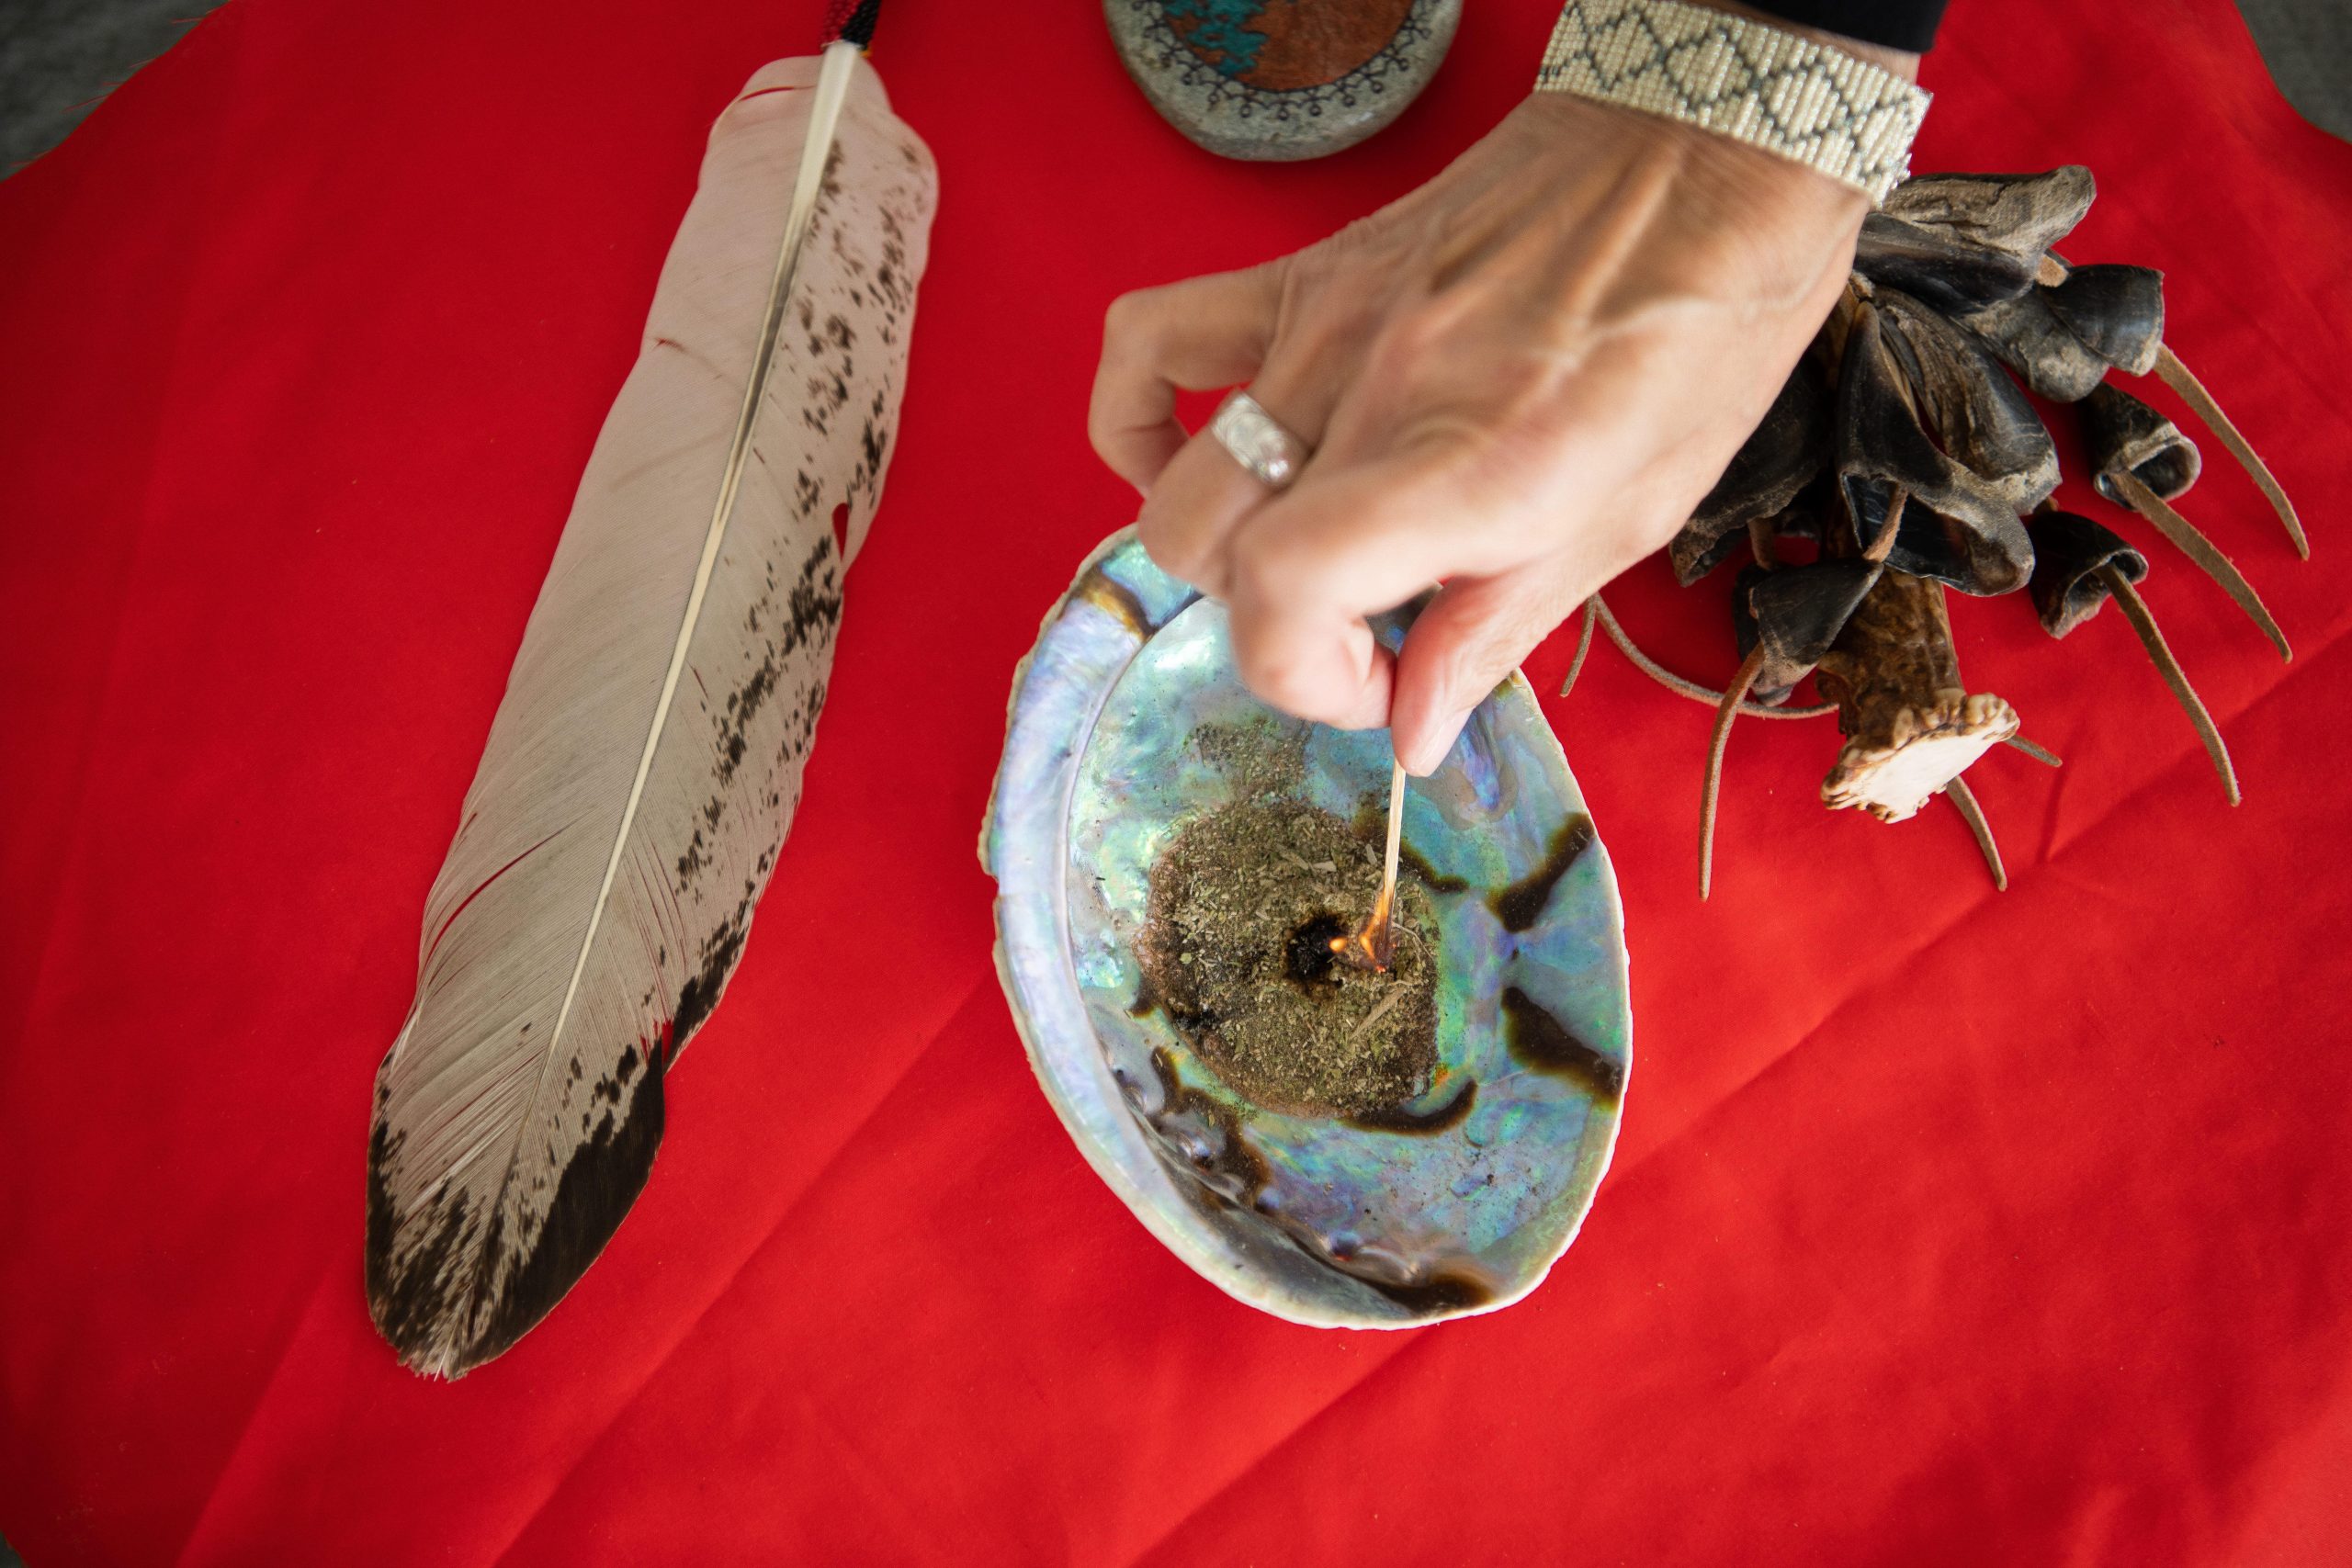 A picture of traditional Indigenous herbs and feather